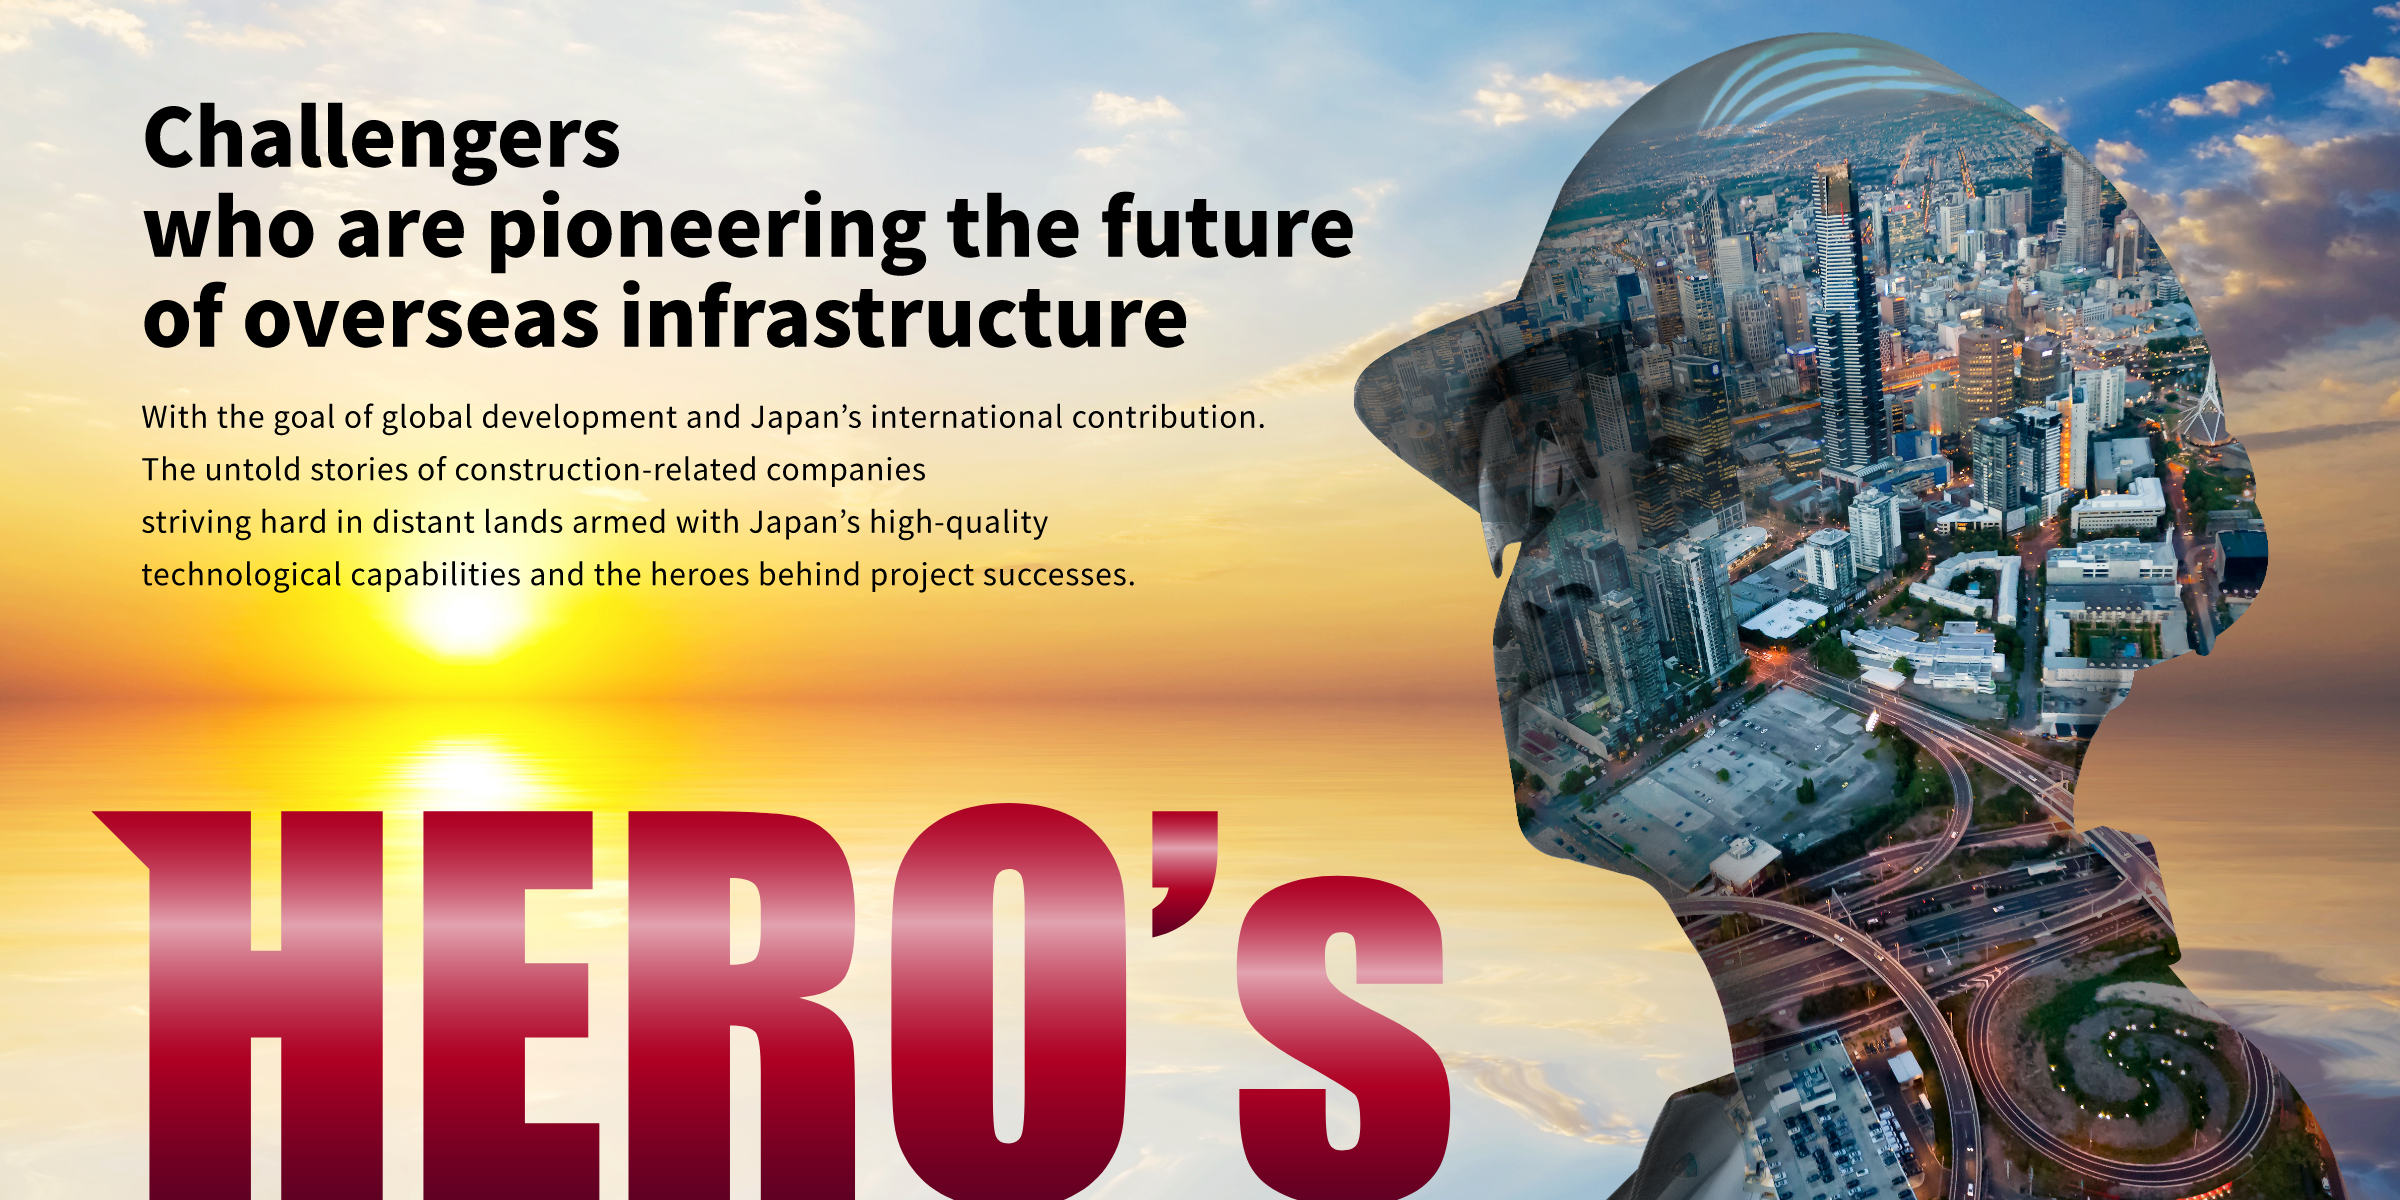 Challengers who are pioneering the future of overseas infrastructure  With the goal of global development and Japan's international contribution. The untold stories of  construction-related companies striving hard in distant lands armed with Japan's high-quality technoloical capabilities and the heroes behind project successes.